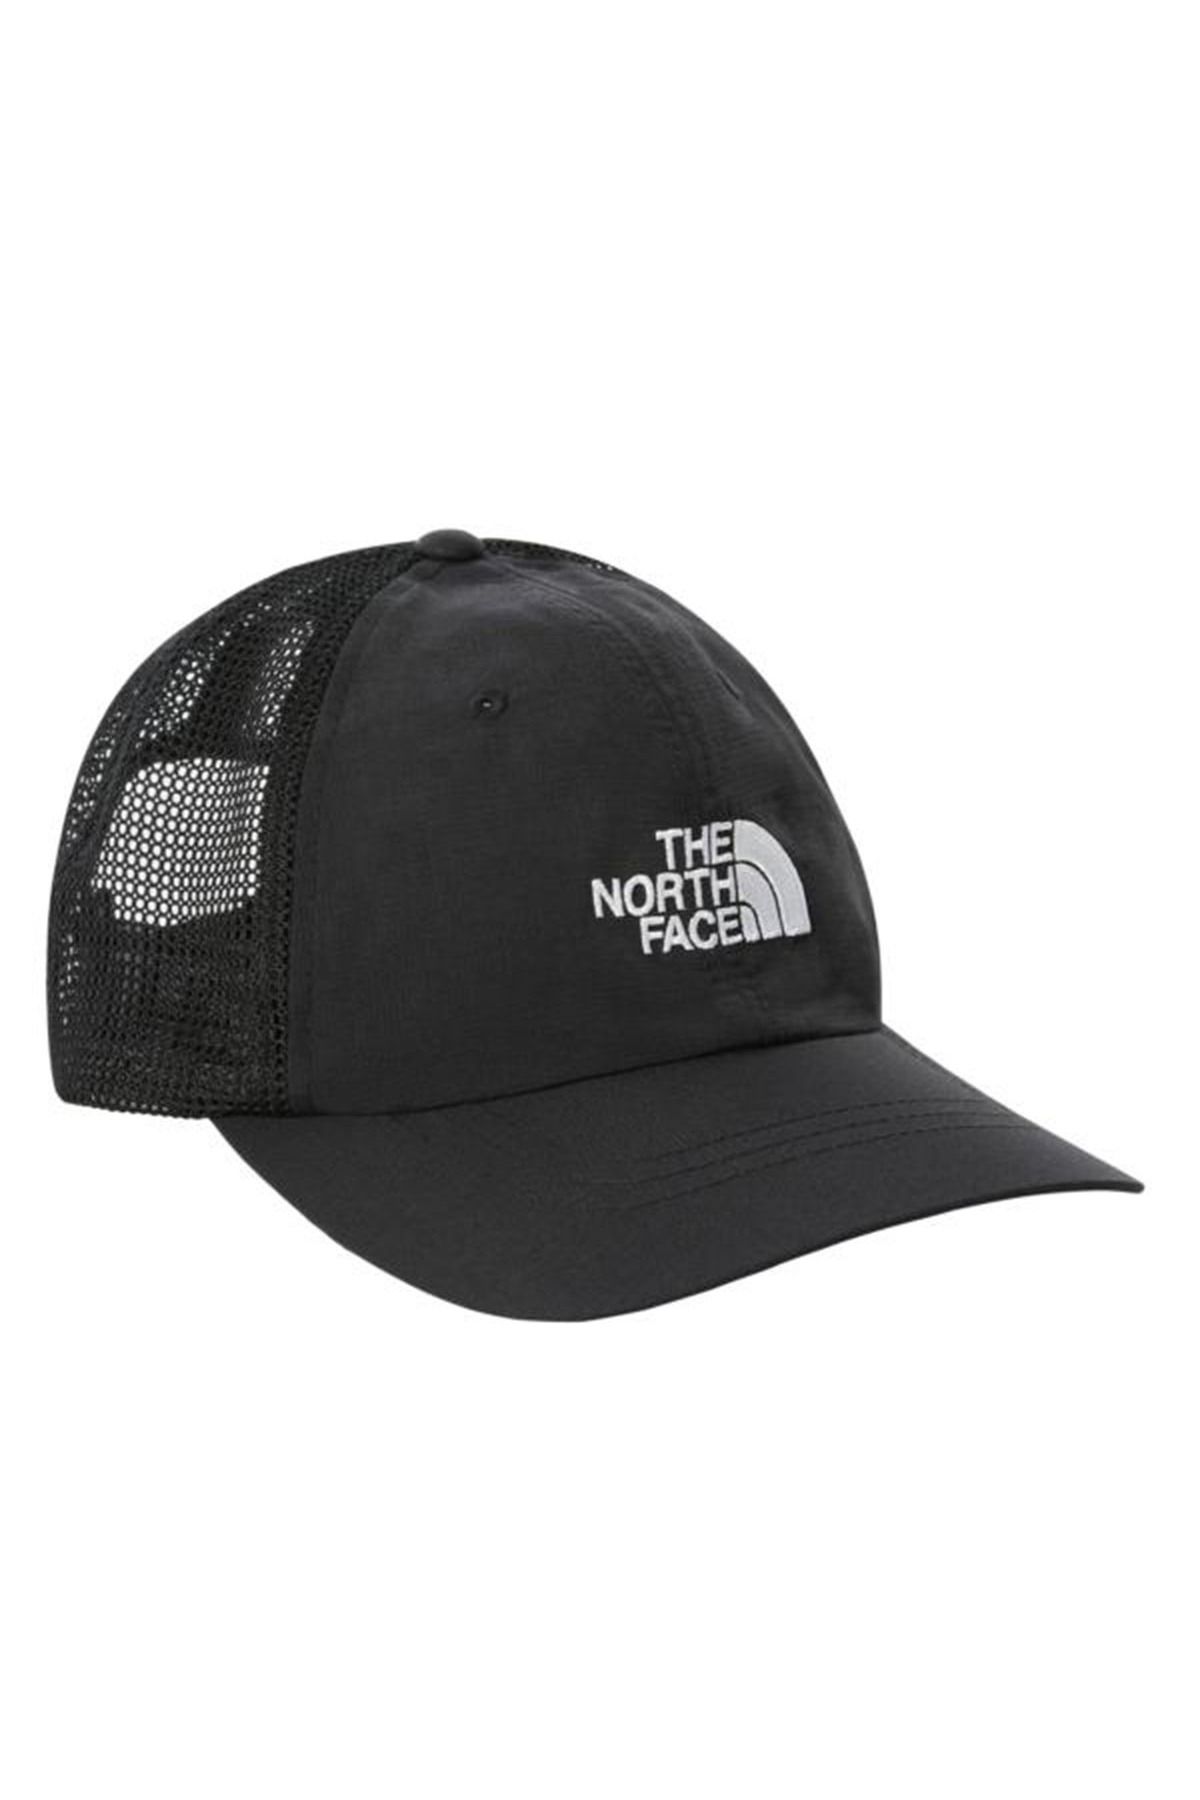 The North Face کلاه مش Horizon Unisex Black Outdoor Hat NF0A55IUJK31